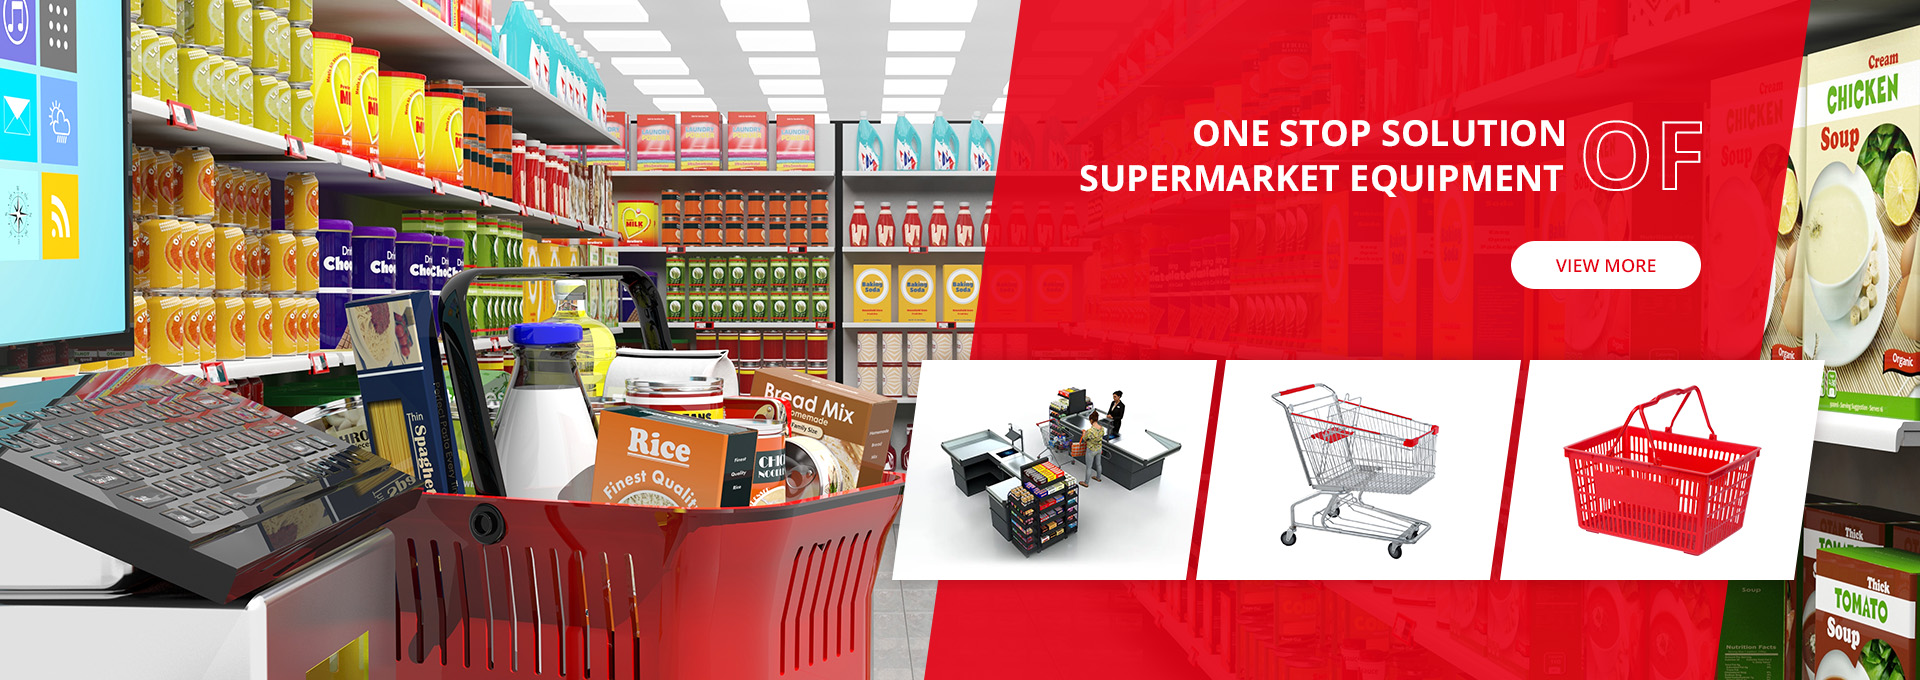 One stop solution of supermarket equipment supplier